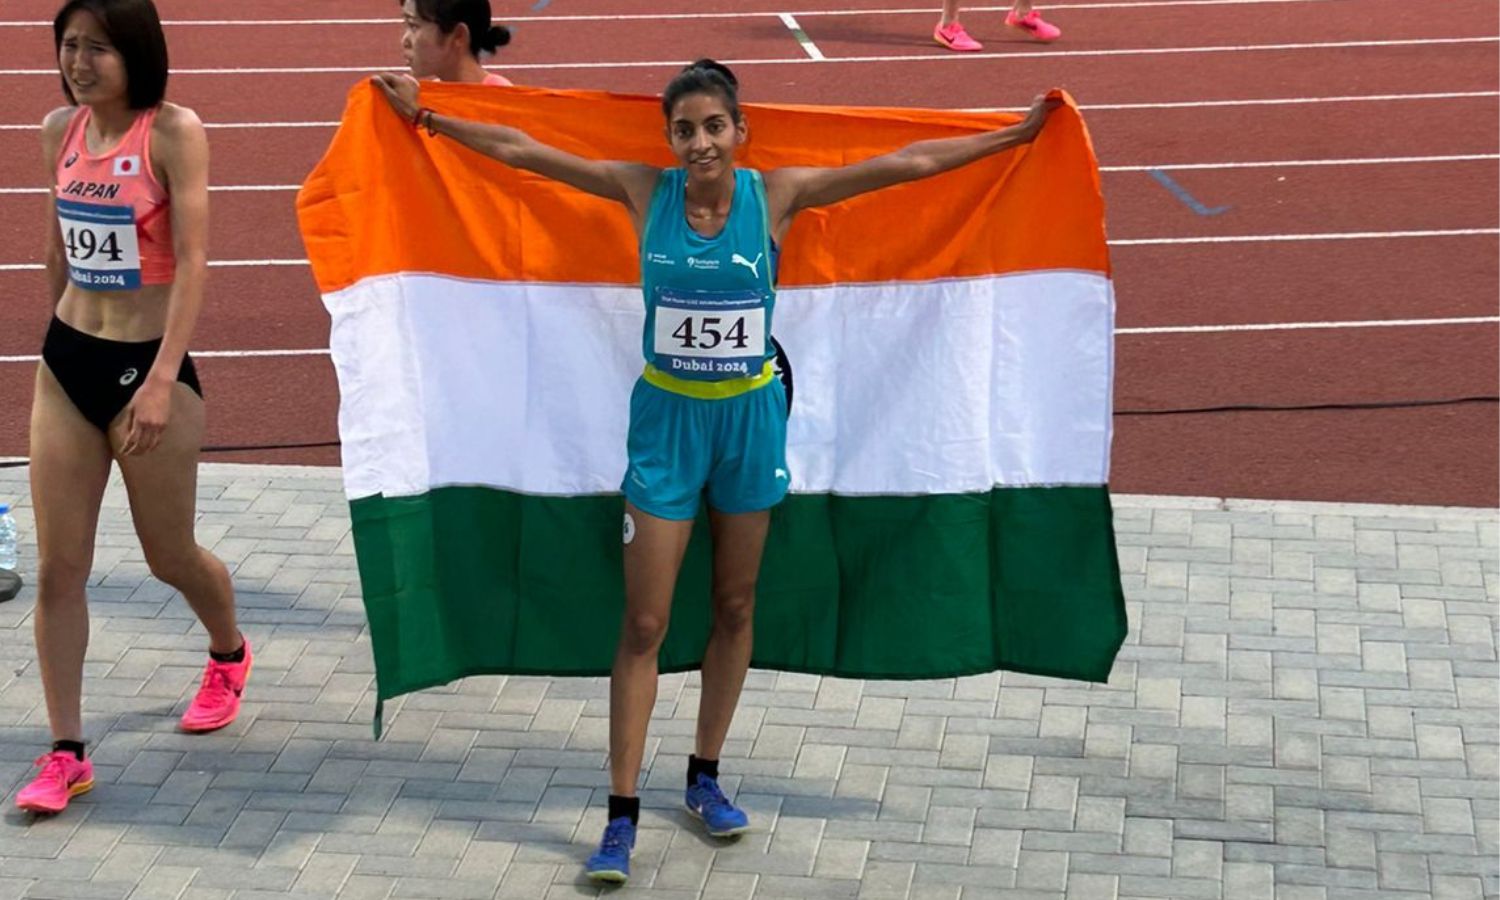 No gold on Day 3, Laxita wins silver in 800m